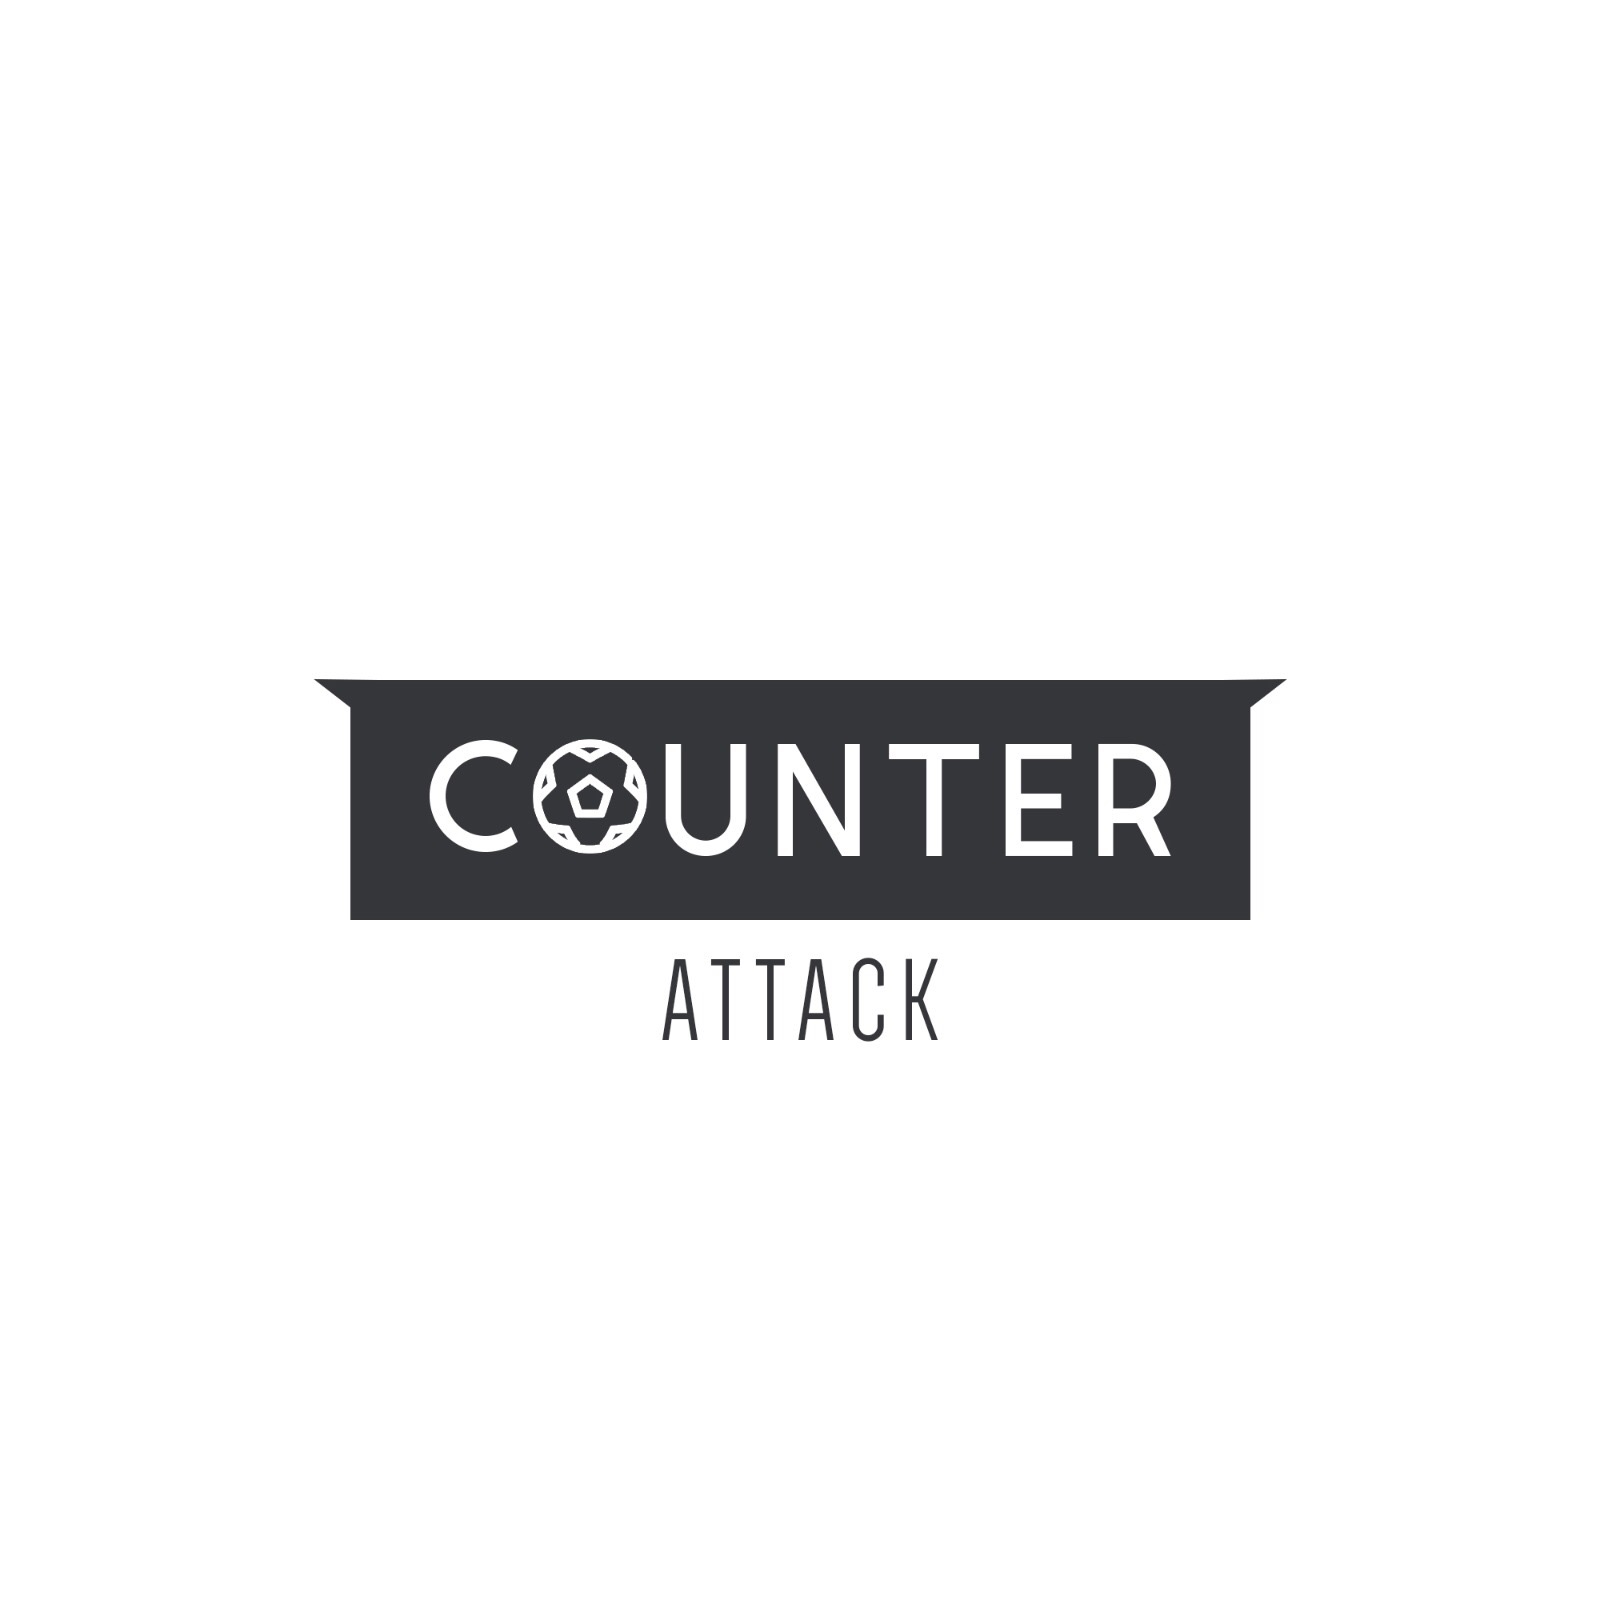 Counter Attack - Episode 128 - Charlie Adam's Straight From The Old School